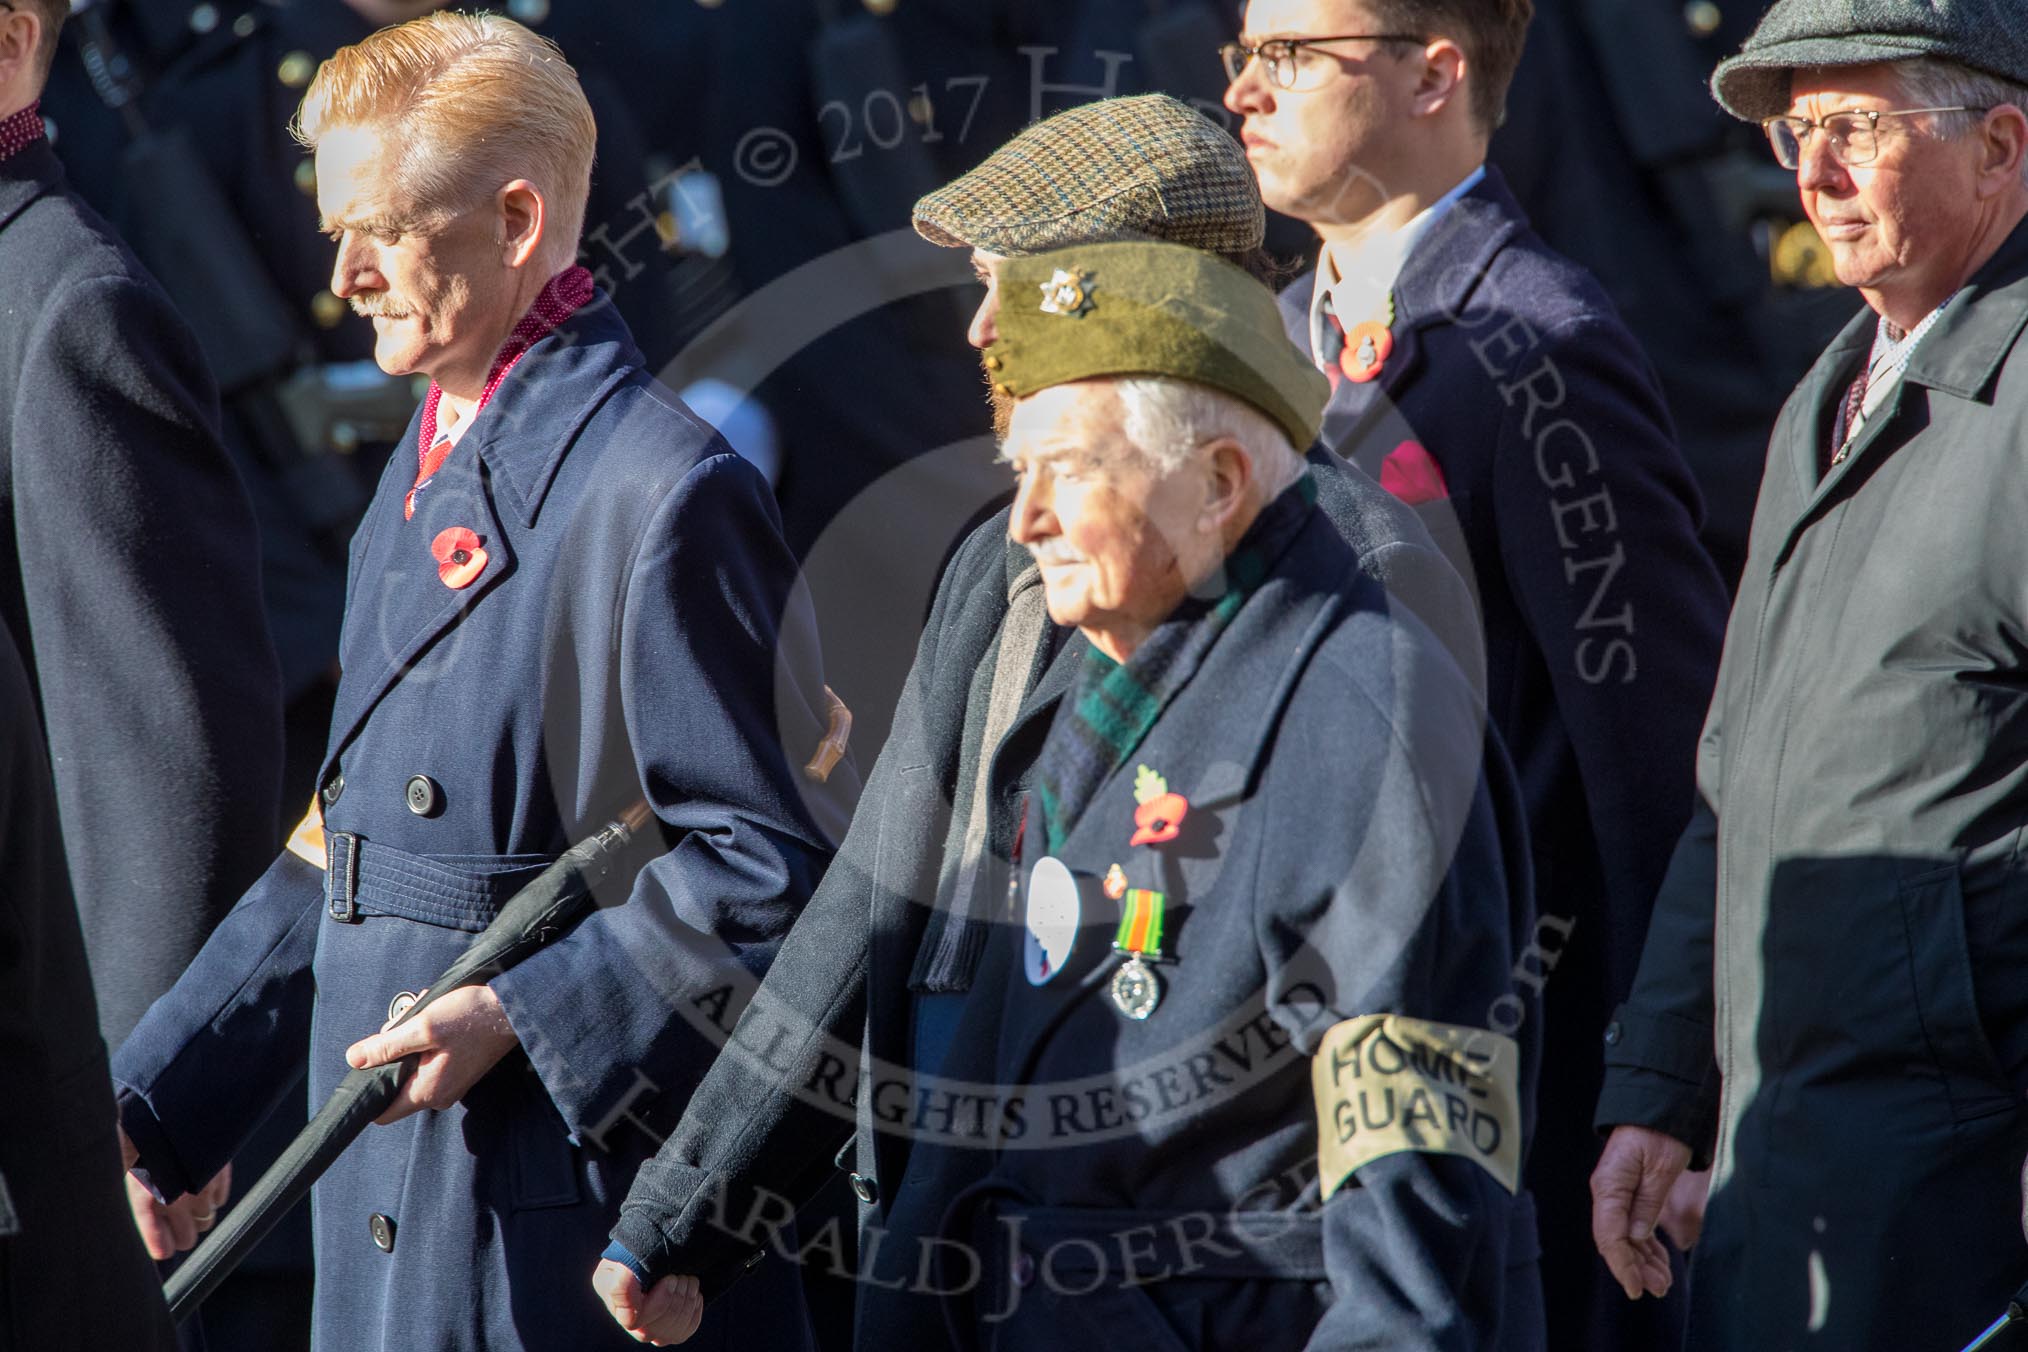 Home Guard Association (Group B38, 8 members) during the Royal British Legion March Past on Remembrance Sunday at the Cenotaph, Whitehall, Westminster, London, 11 November 2018, 12:13.